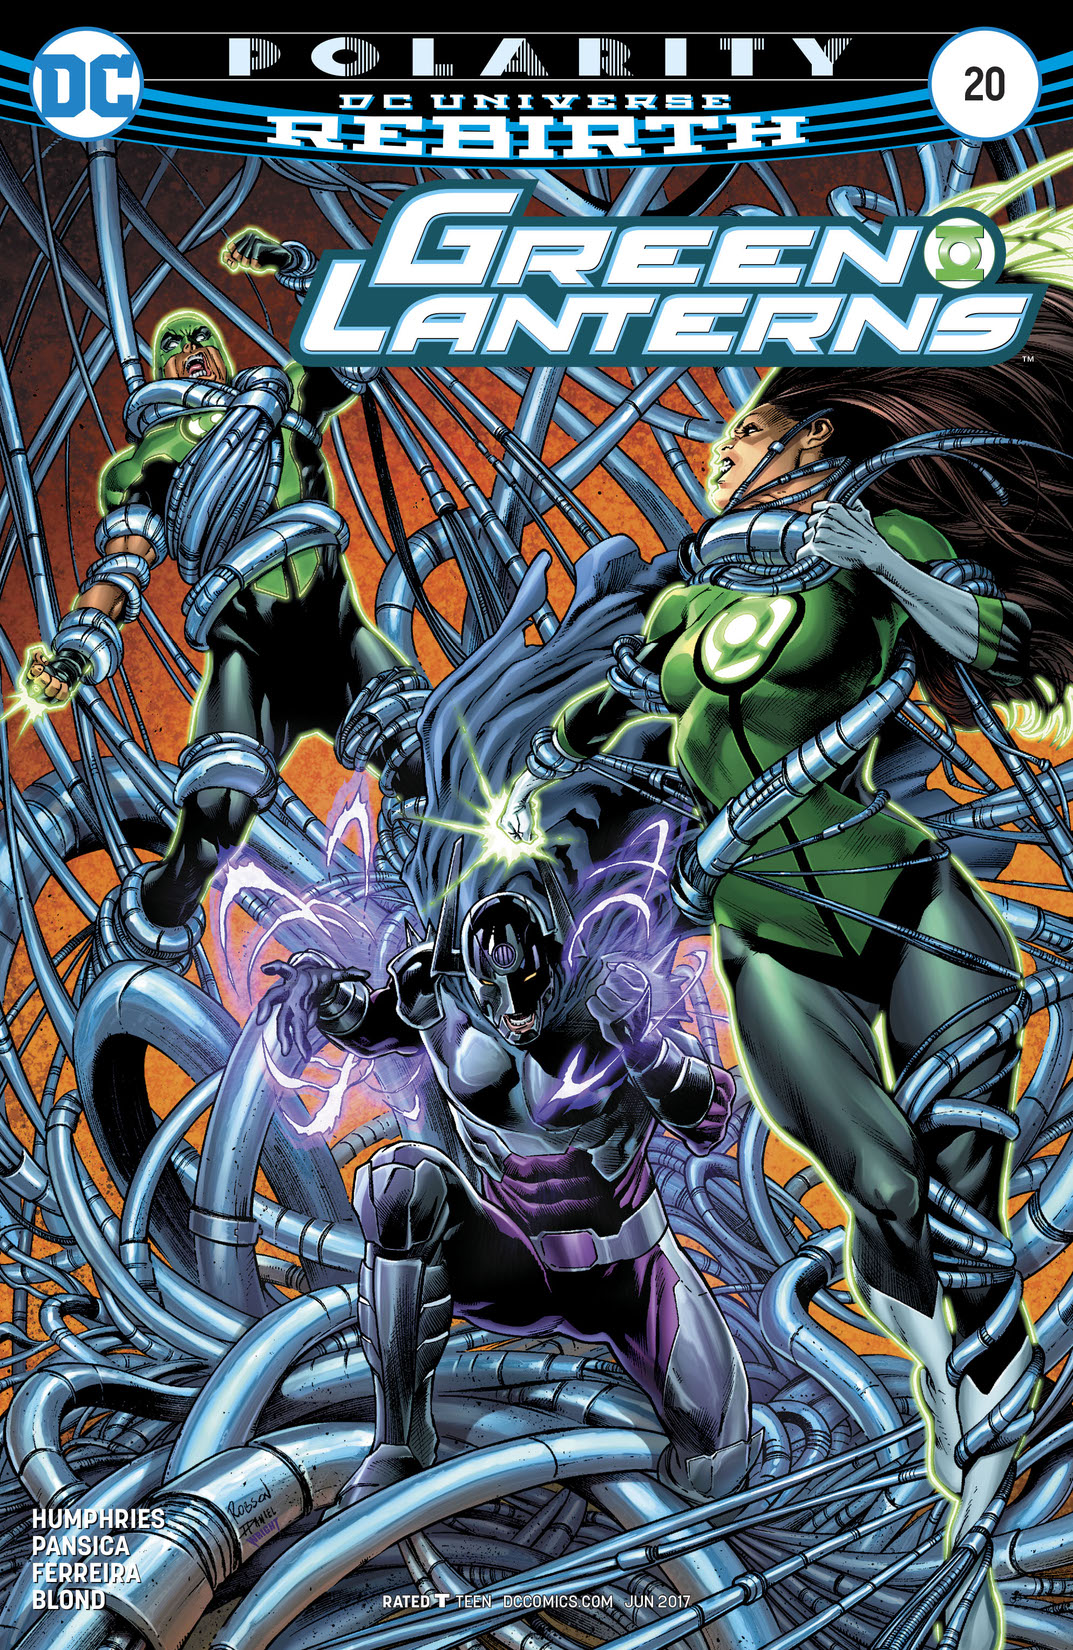 Green Lanterns #20 preview images